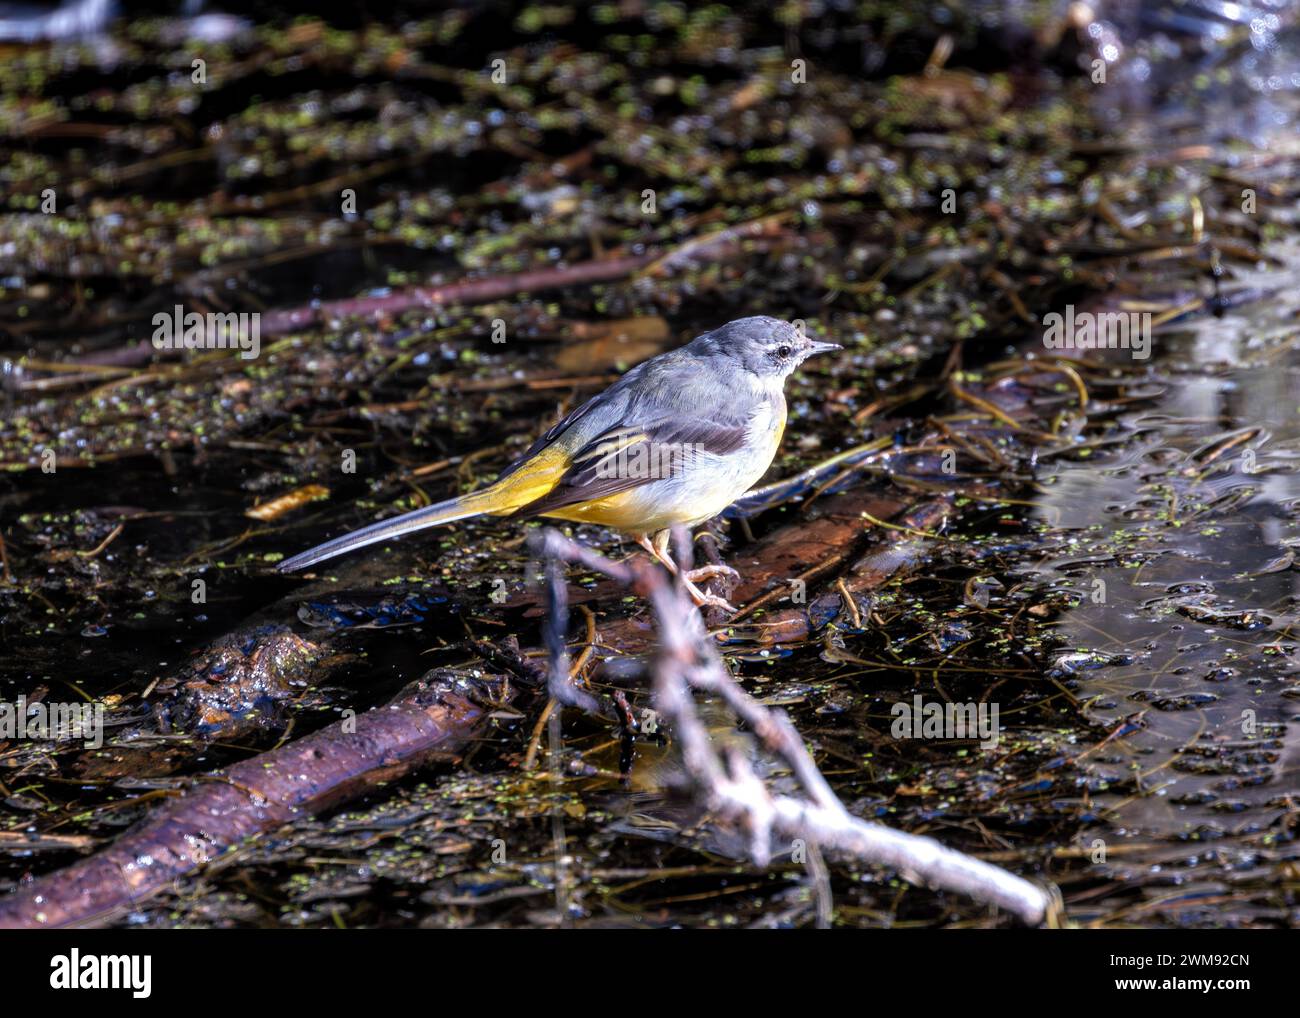 A Grey Wagtail gracefully flits along a streambed, its long tail feathers dipping with each step. Stock Photo